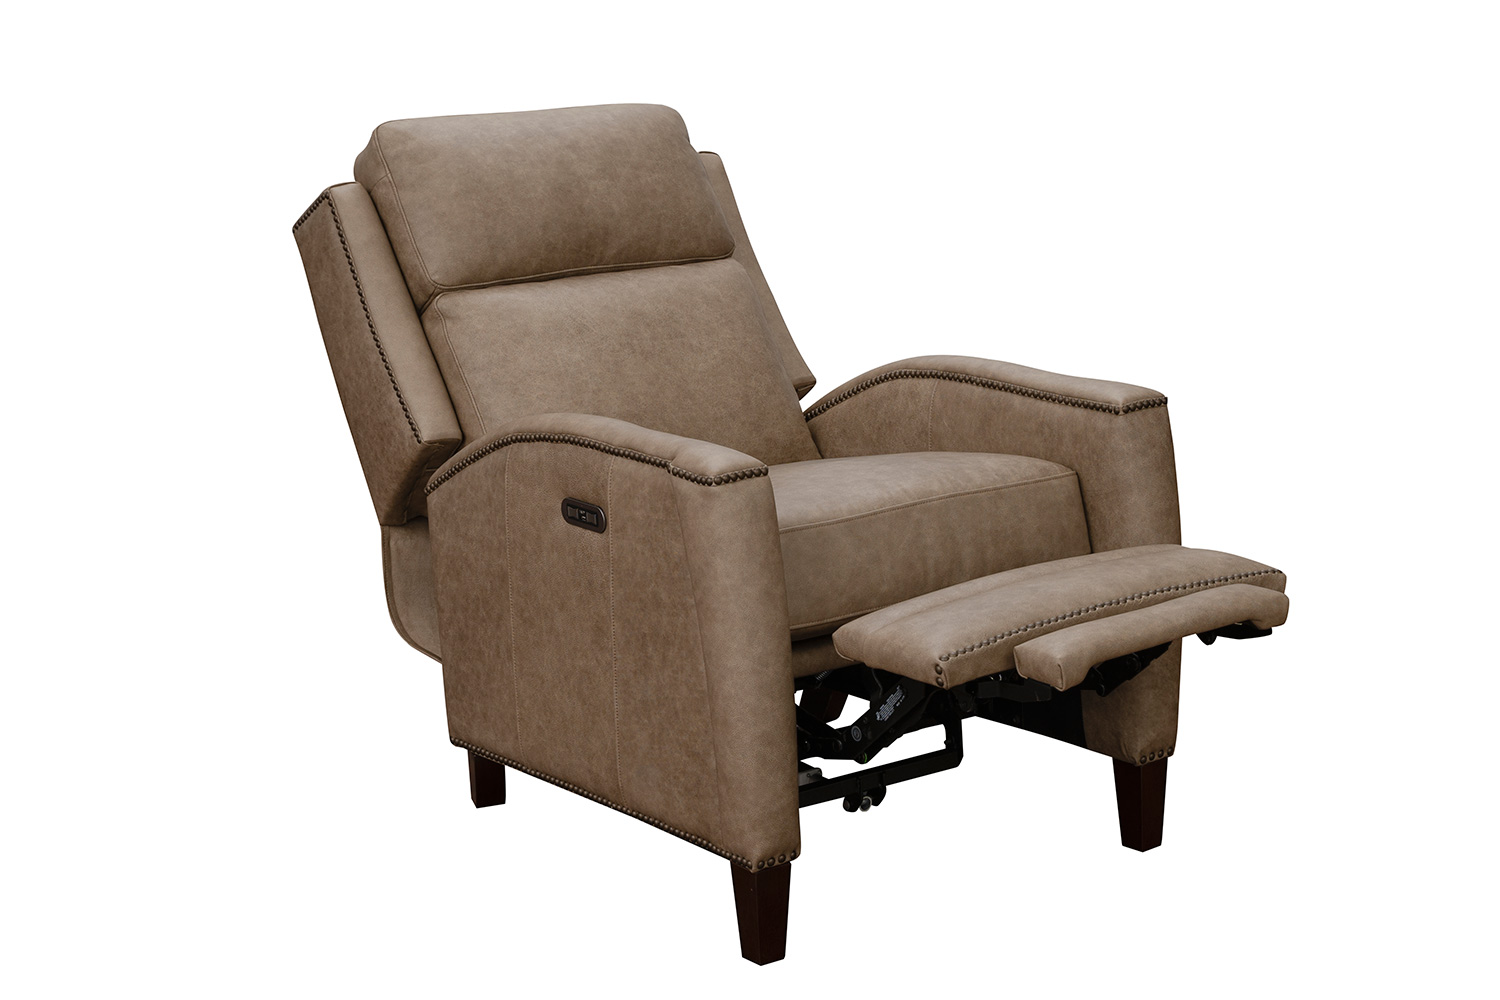 Barcalounger Nolan Voice Activated Power Recliner Chair with Power Head Rest - York Taupe/all top grain leather